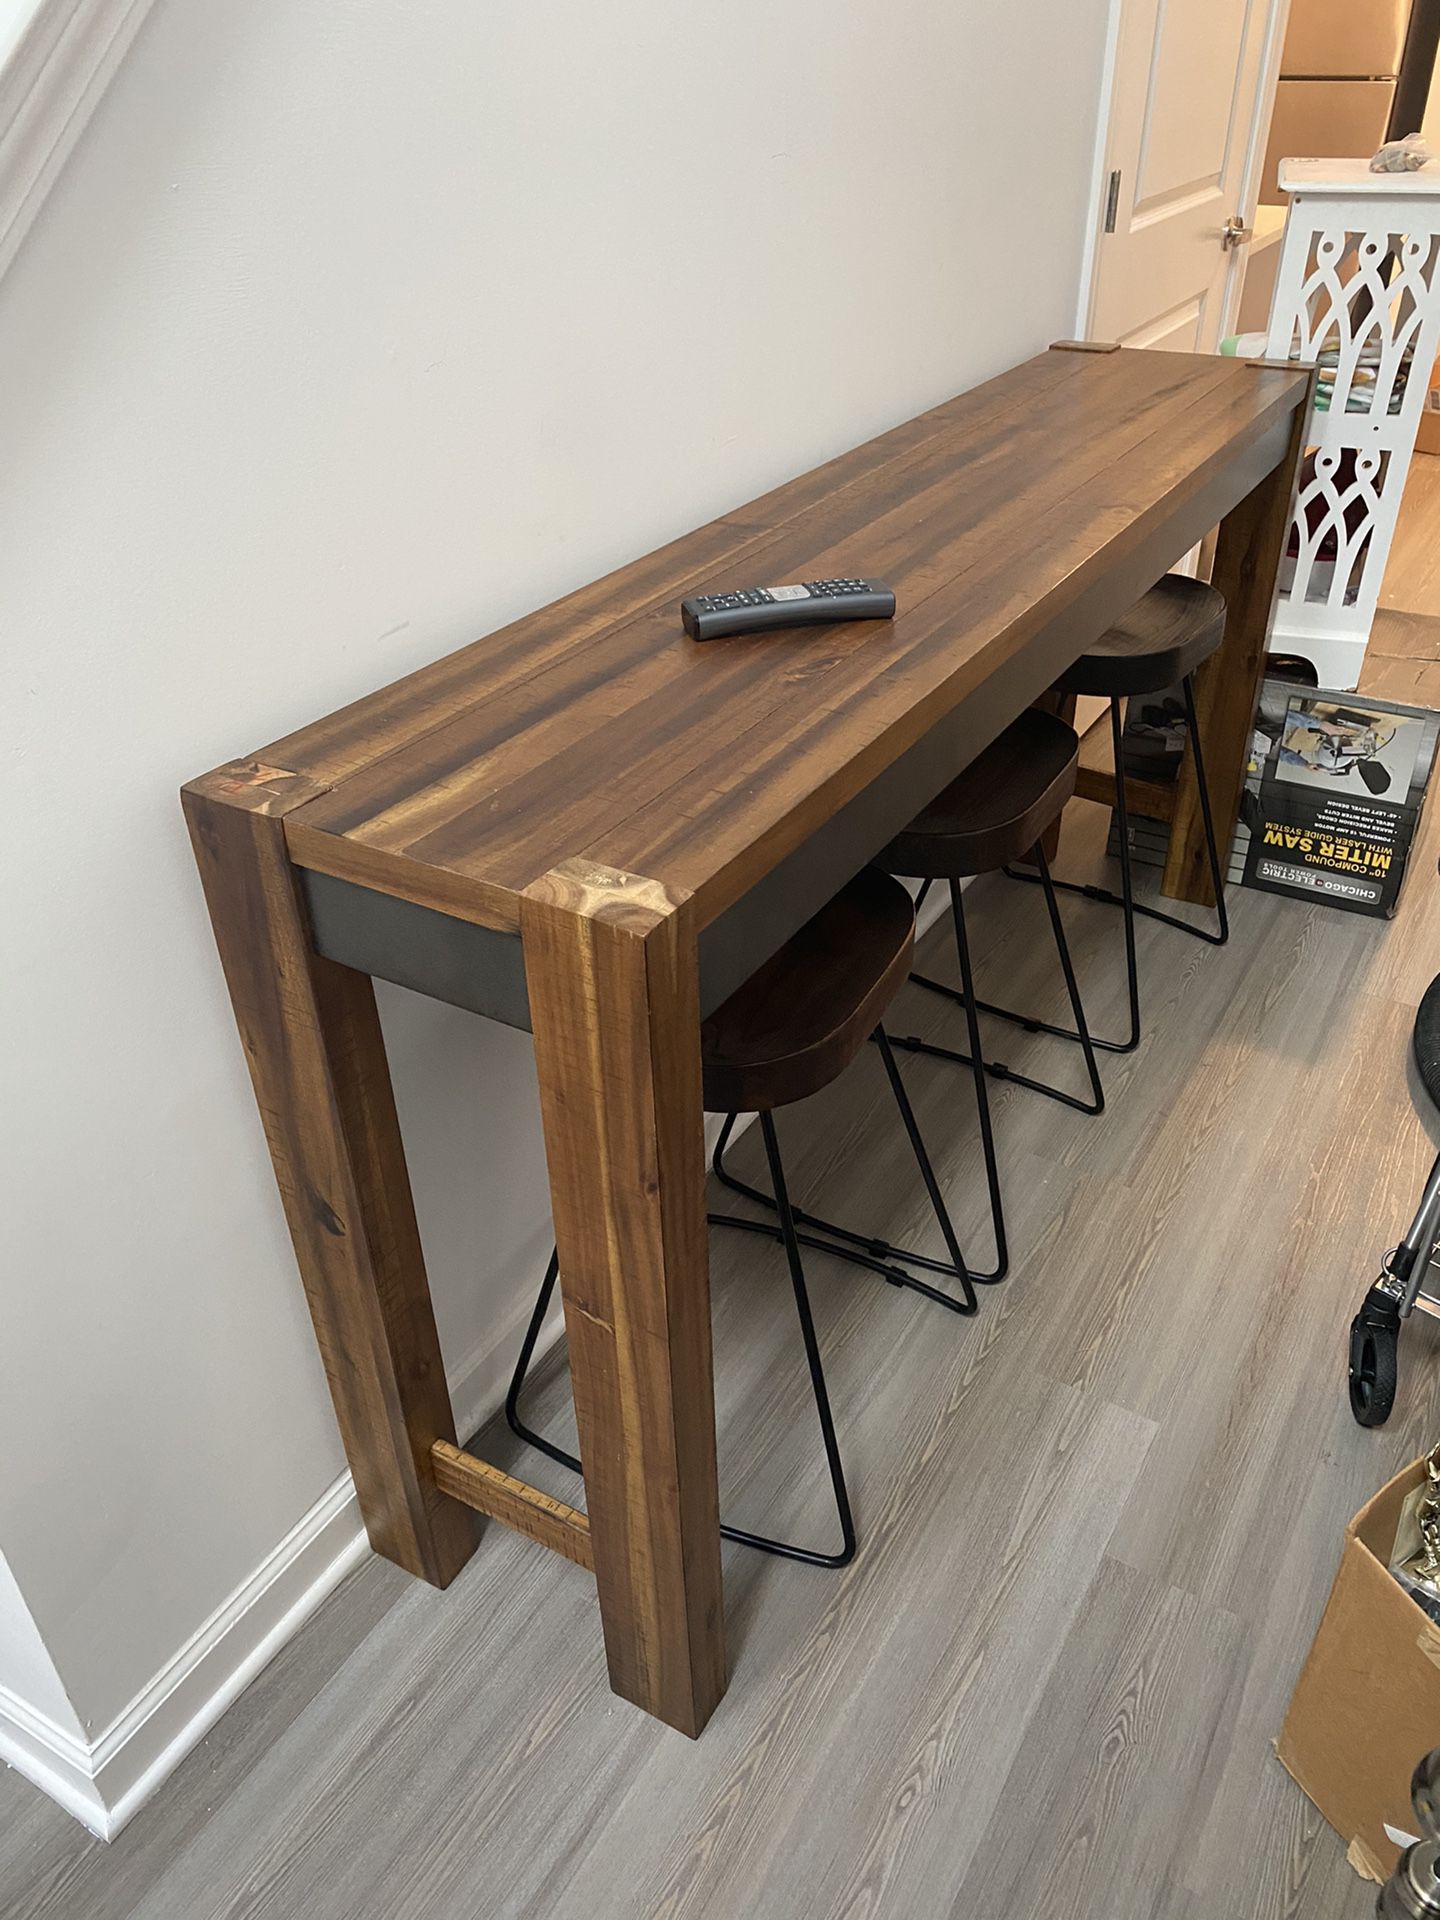 Kitchen table Counter Height (TABLE ONLY) (6FT BY 1FT 4INCH)